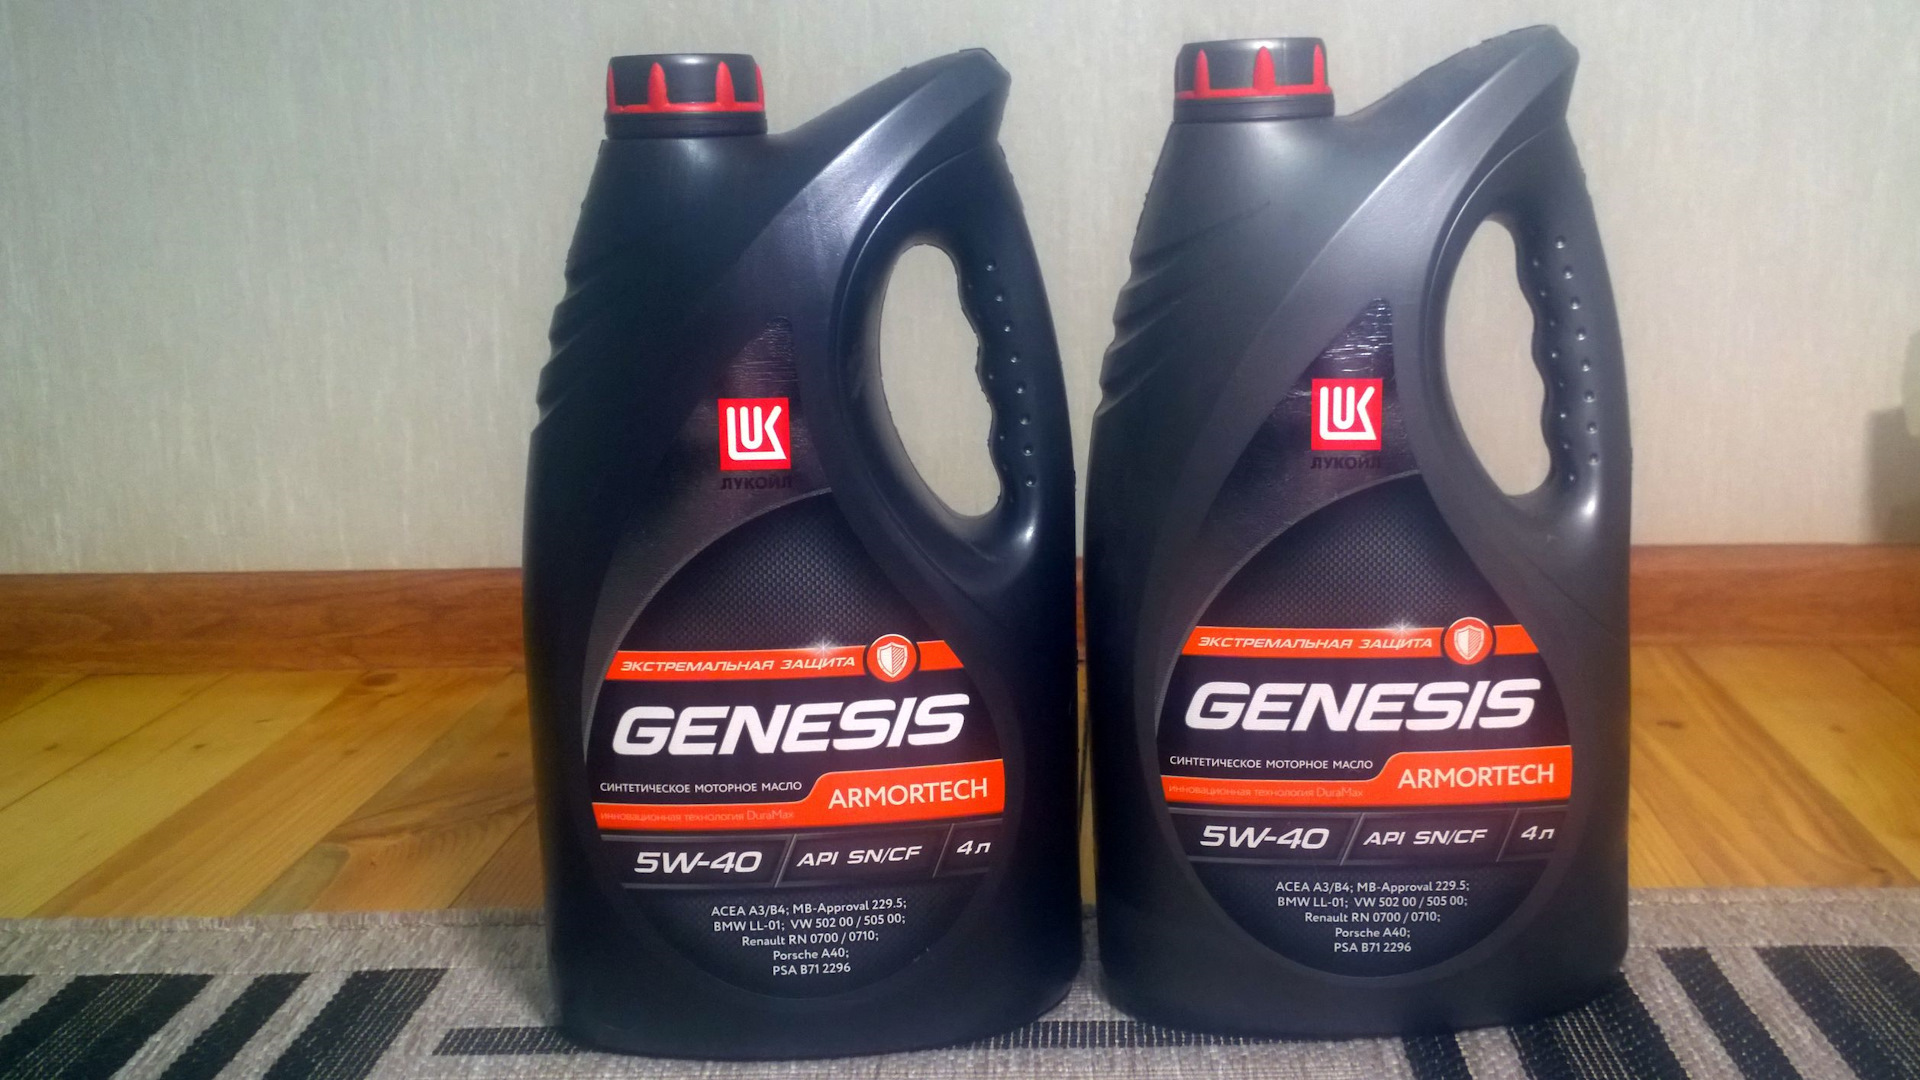 Lukoil Genesis Armortech GC 5w-30. Lukoil Genesis Armortech шов на канистре. Канистра масла Лукойл GM. Lukoil 3149300. Масло лукойл мазда